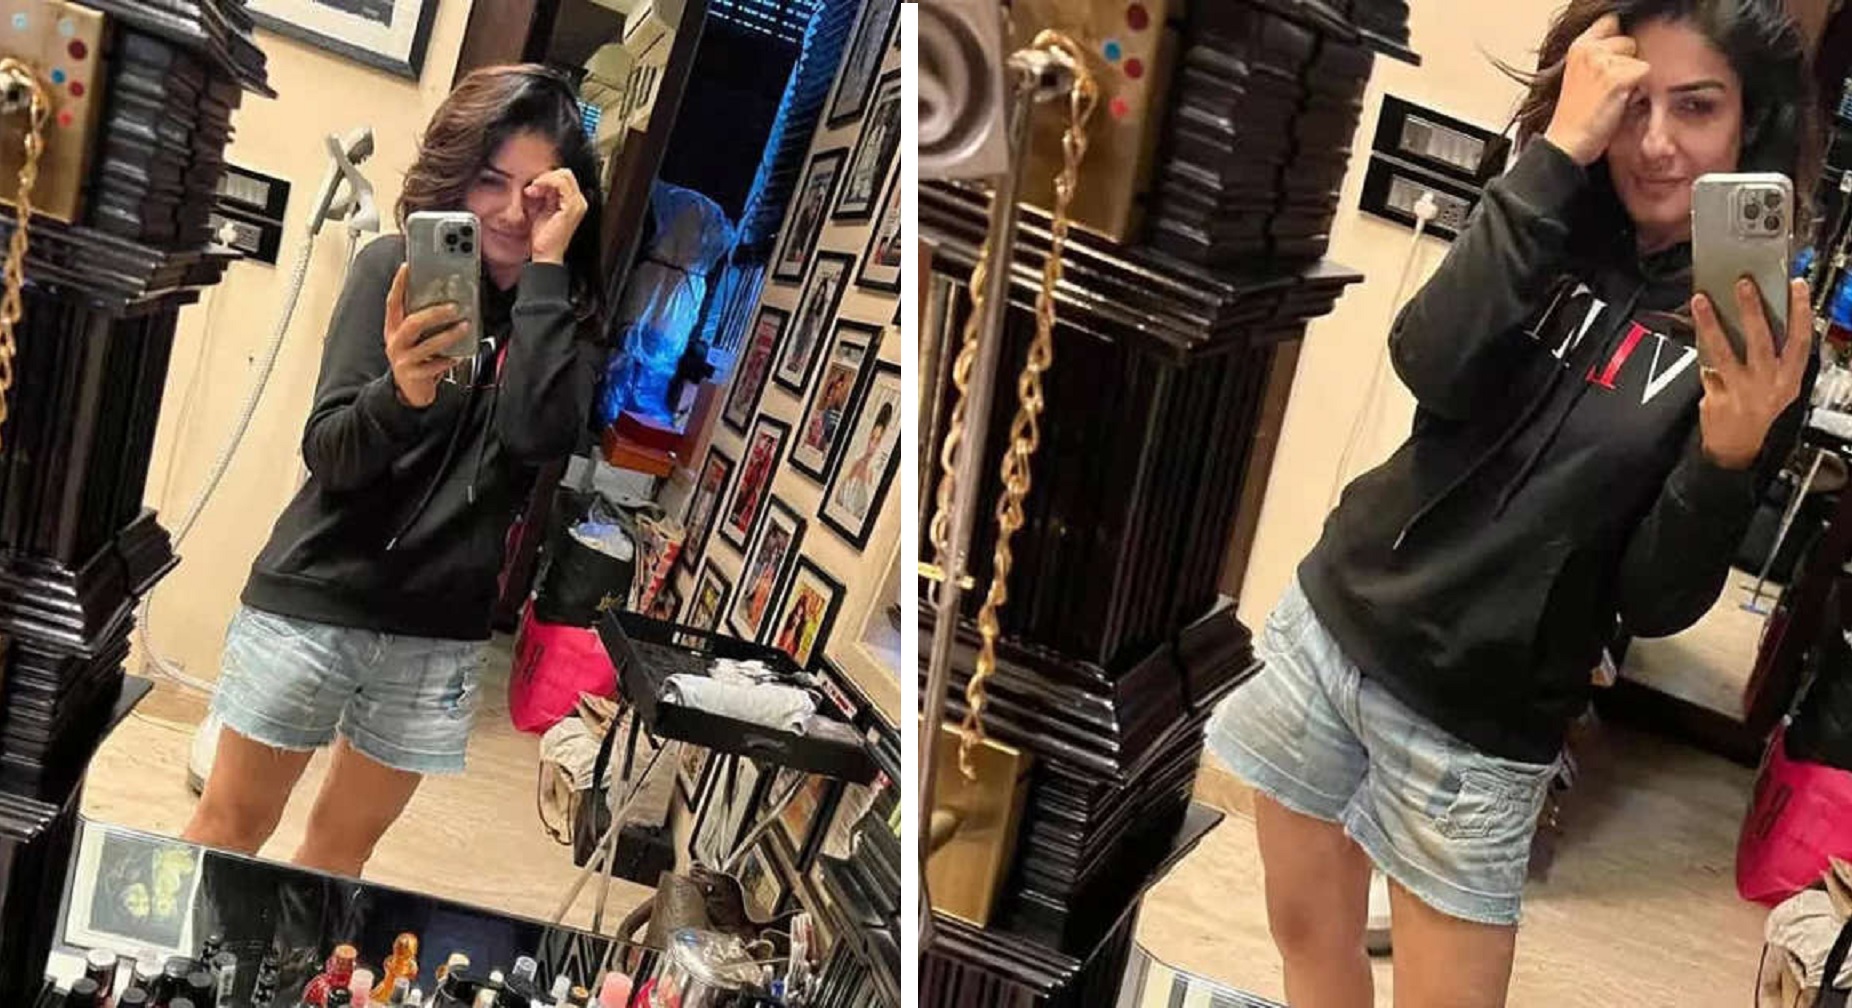 Raveena Tandon’s Latest Pic On Social Media Goes Viral: People Say She Looks Like a 15 Year Old